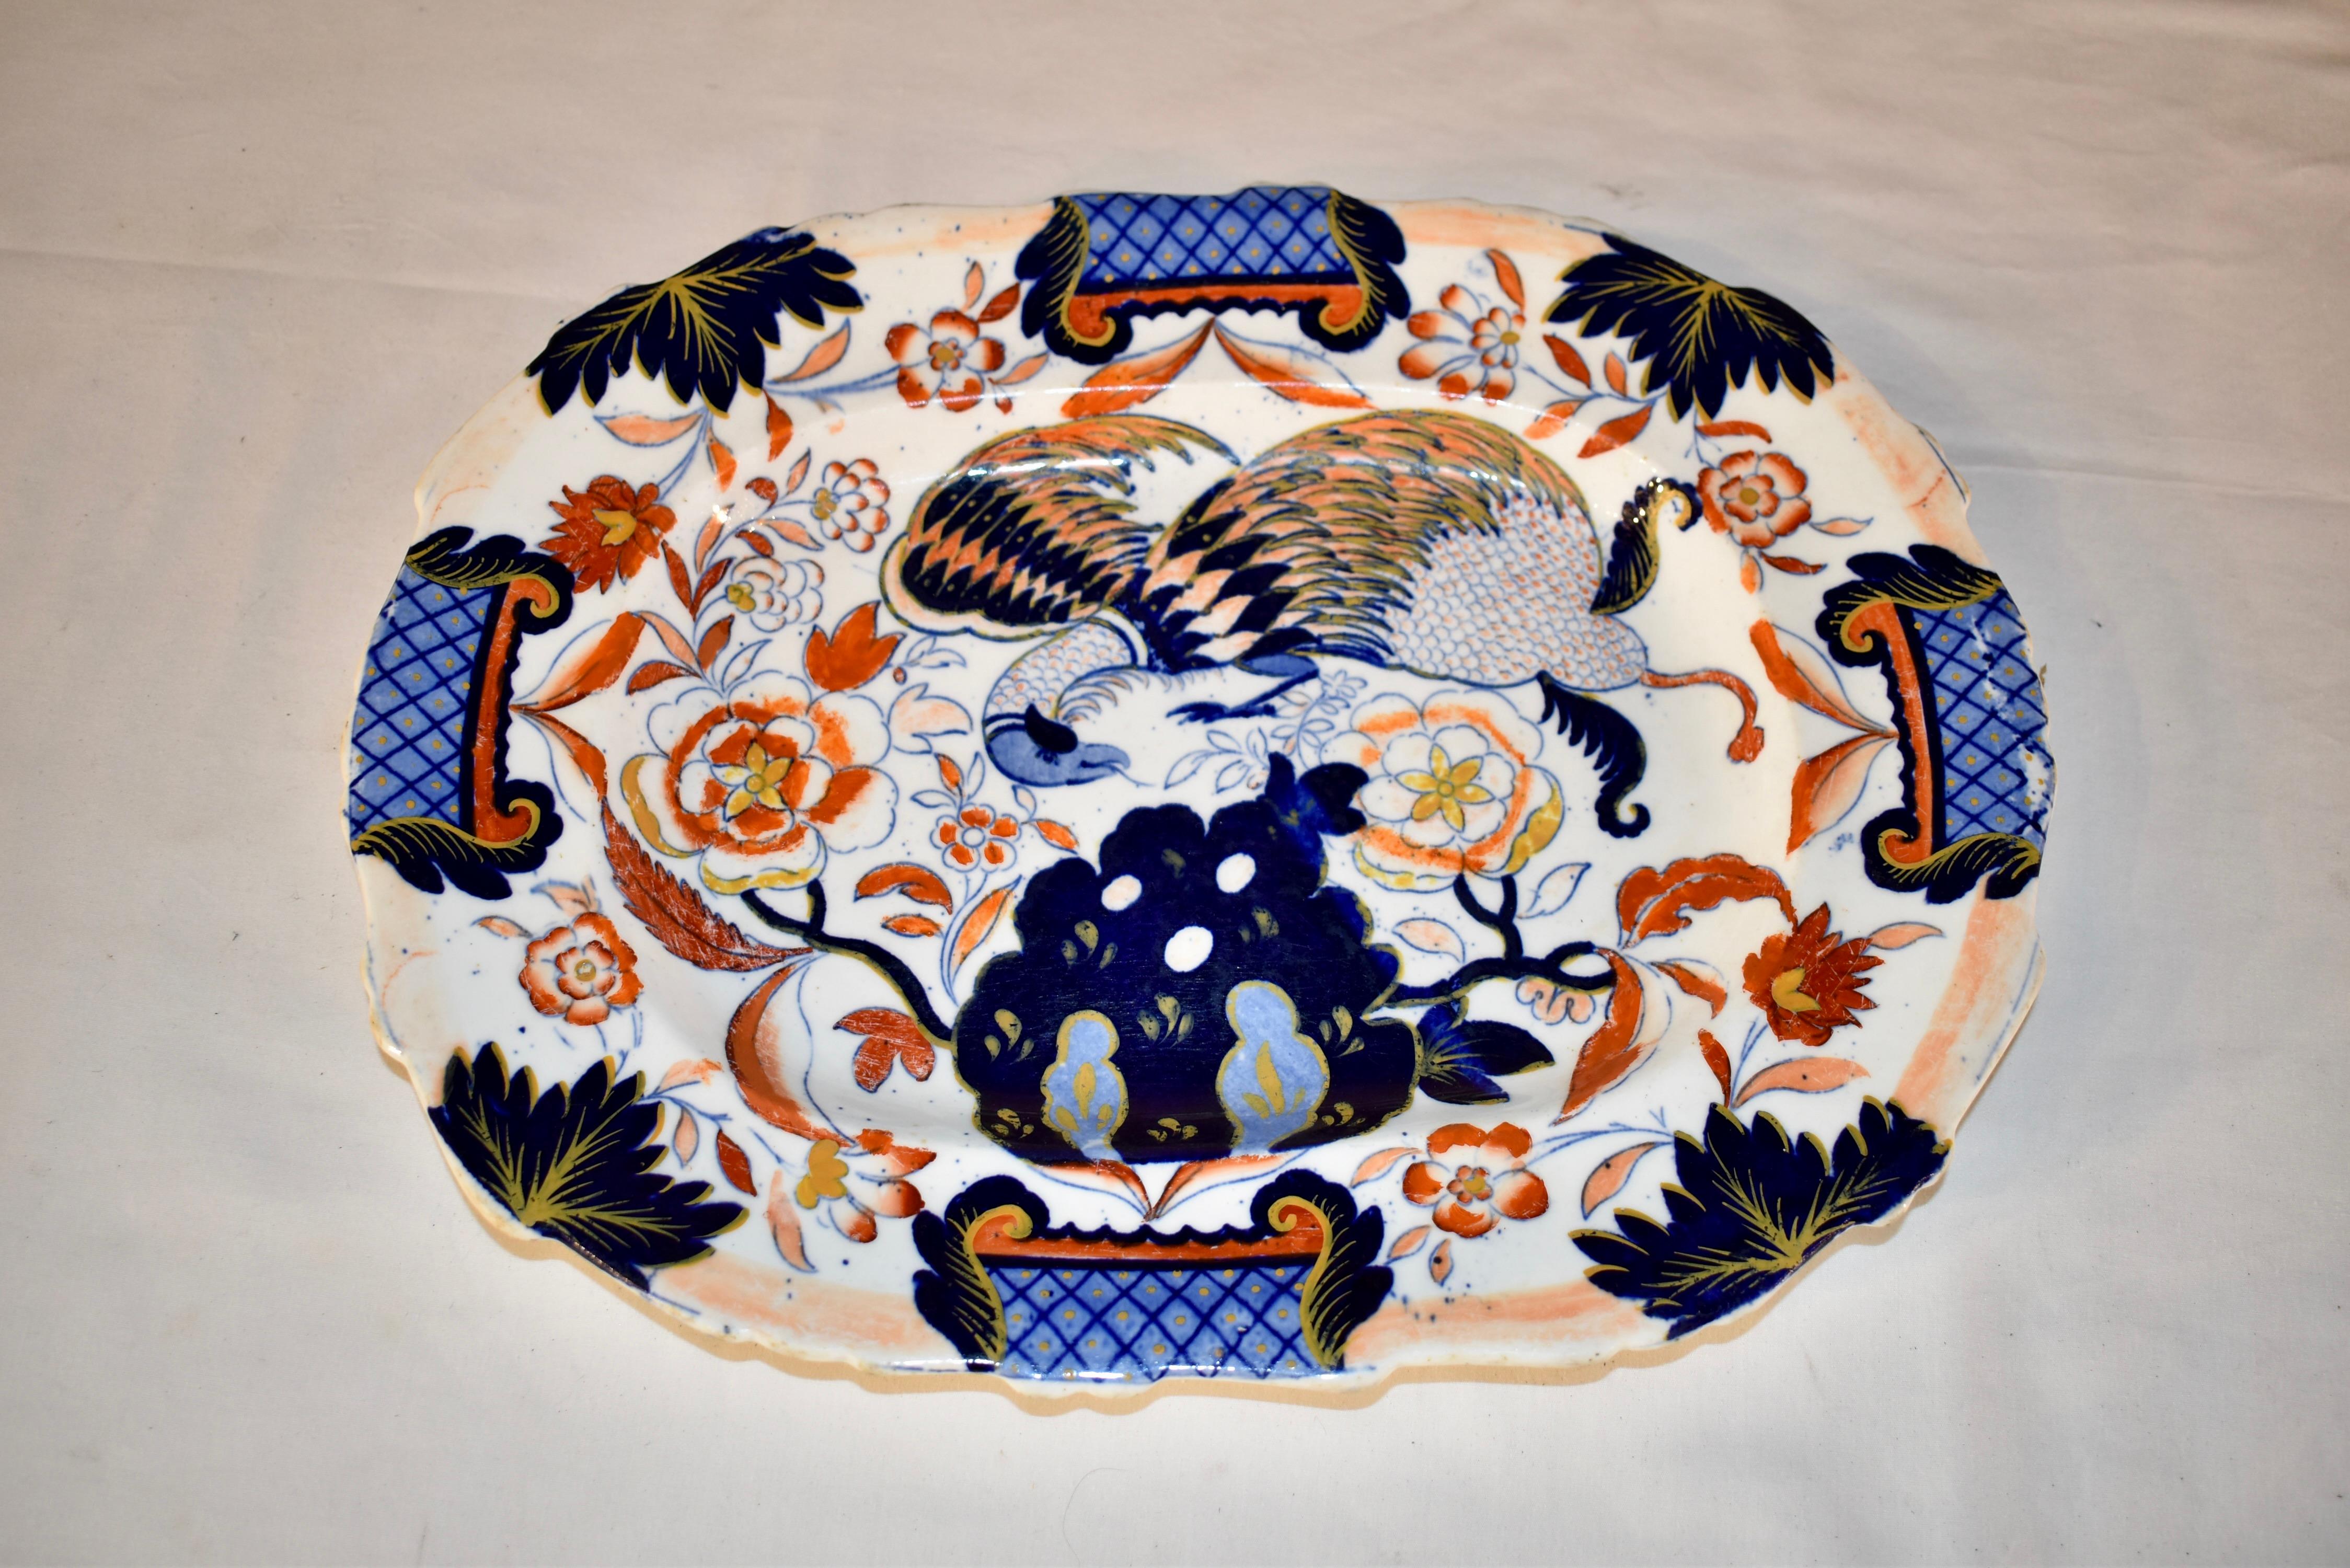 19th century English porcelain platter with lovely hand painted and transfer decoration. The pattern depicts a phoenix among a multitude of florals with jardinieres on all four sides of the platter.